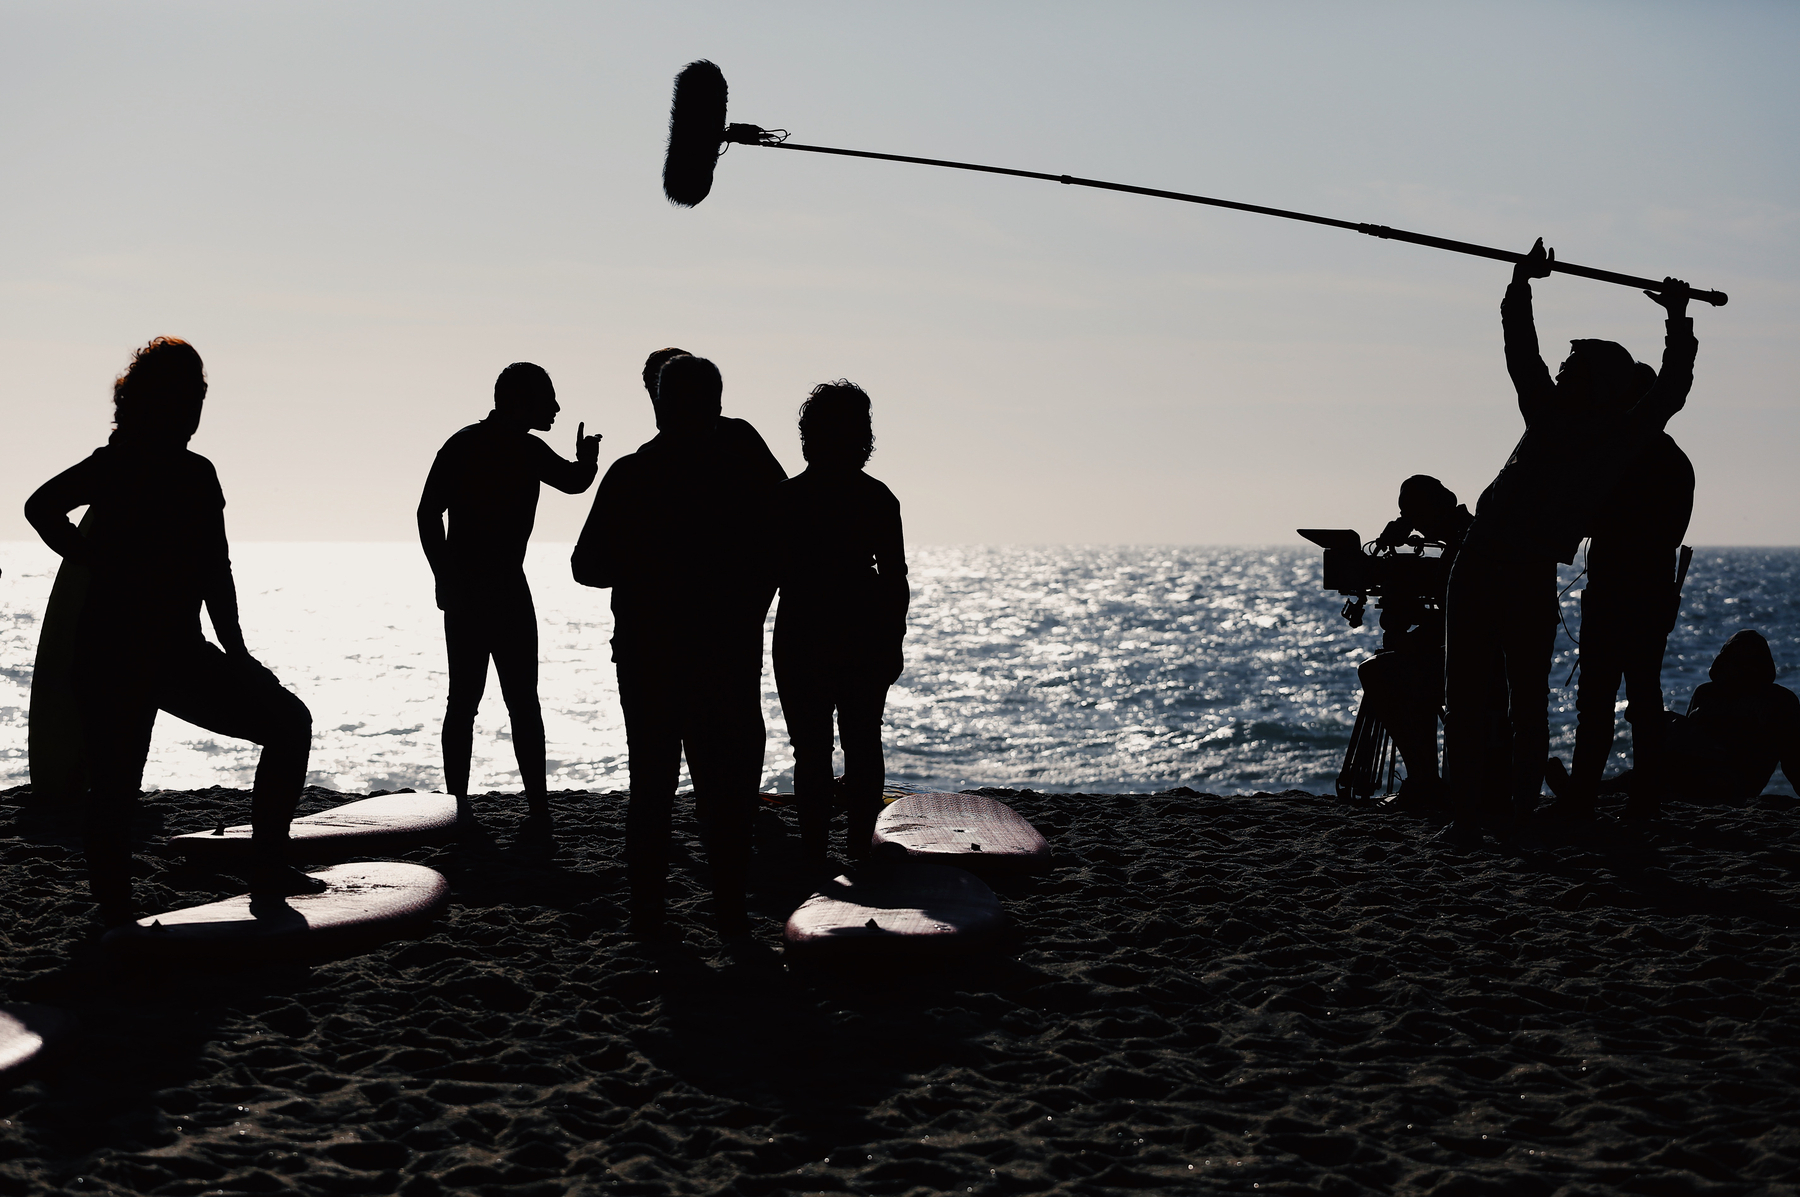 A film crew shoots a scene at the beach. We can see some surf boards, the cast on the left, crew on the right, and a huge boom microphone over them. 